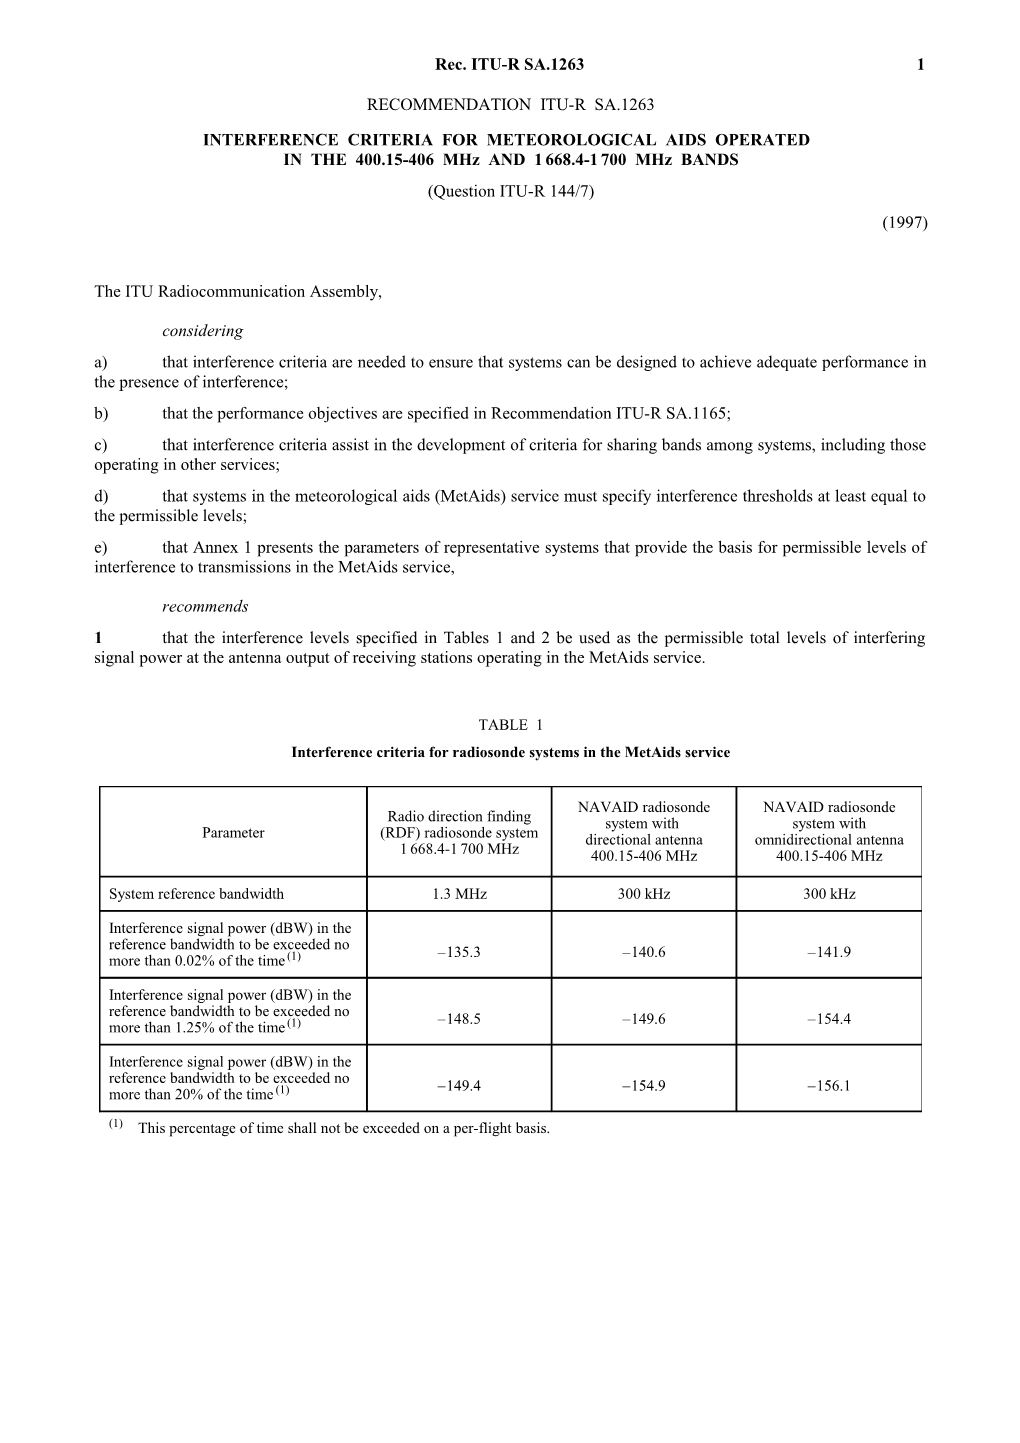 SA.1263 - Interference Criteria for Meteorological Aids Operated in the 400.15-406 Mhz